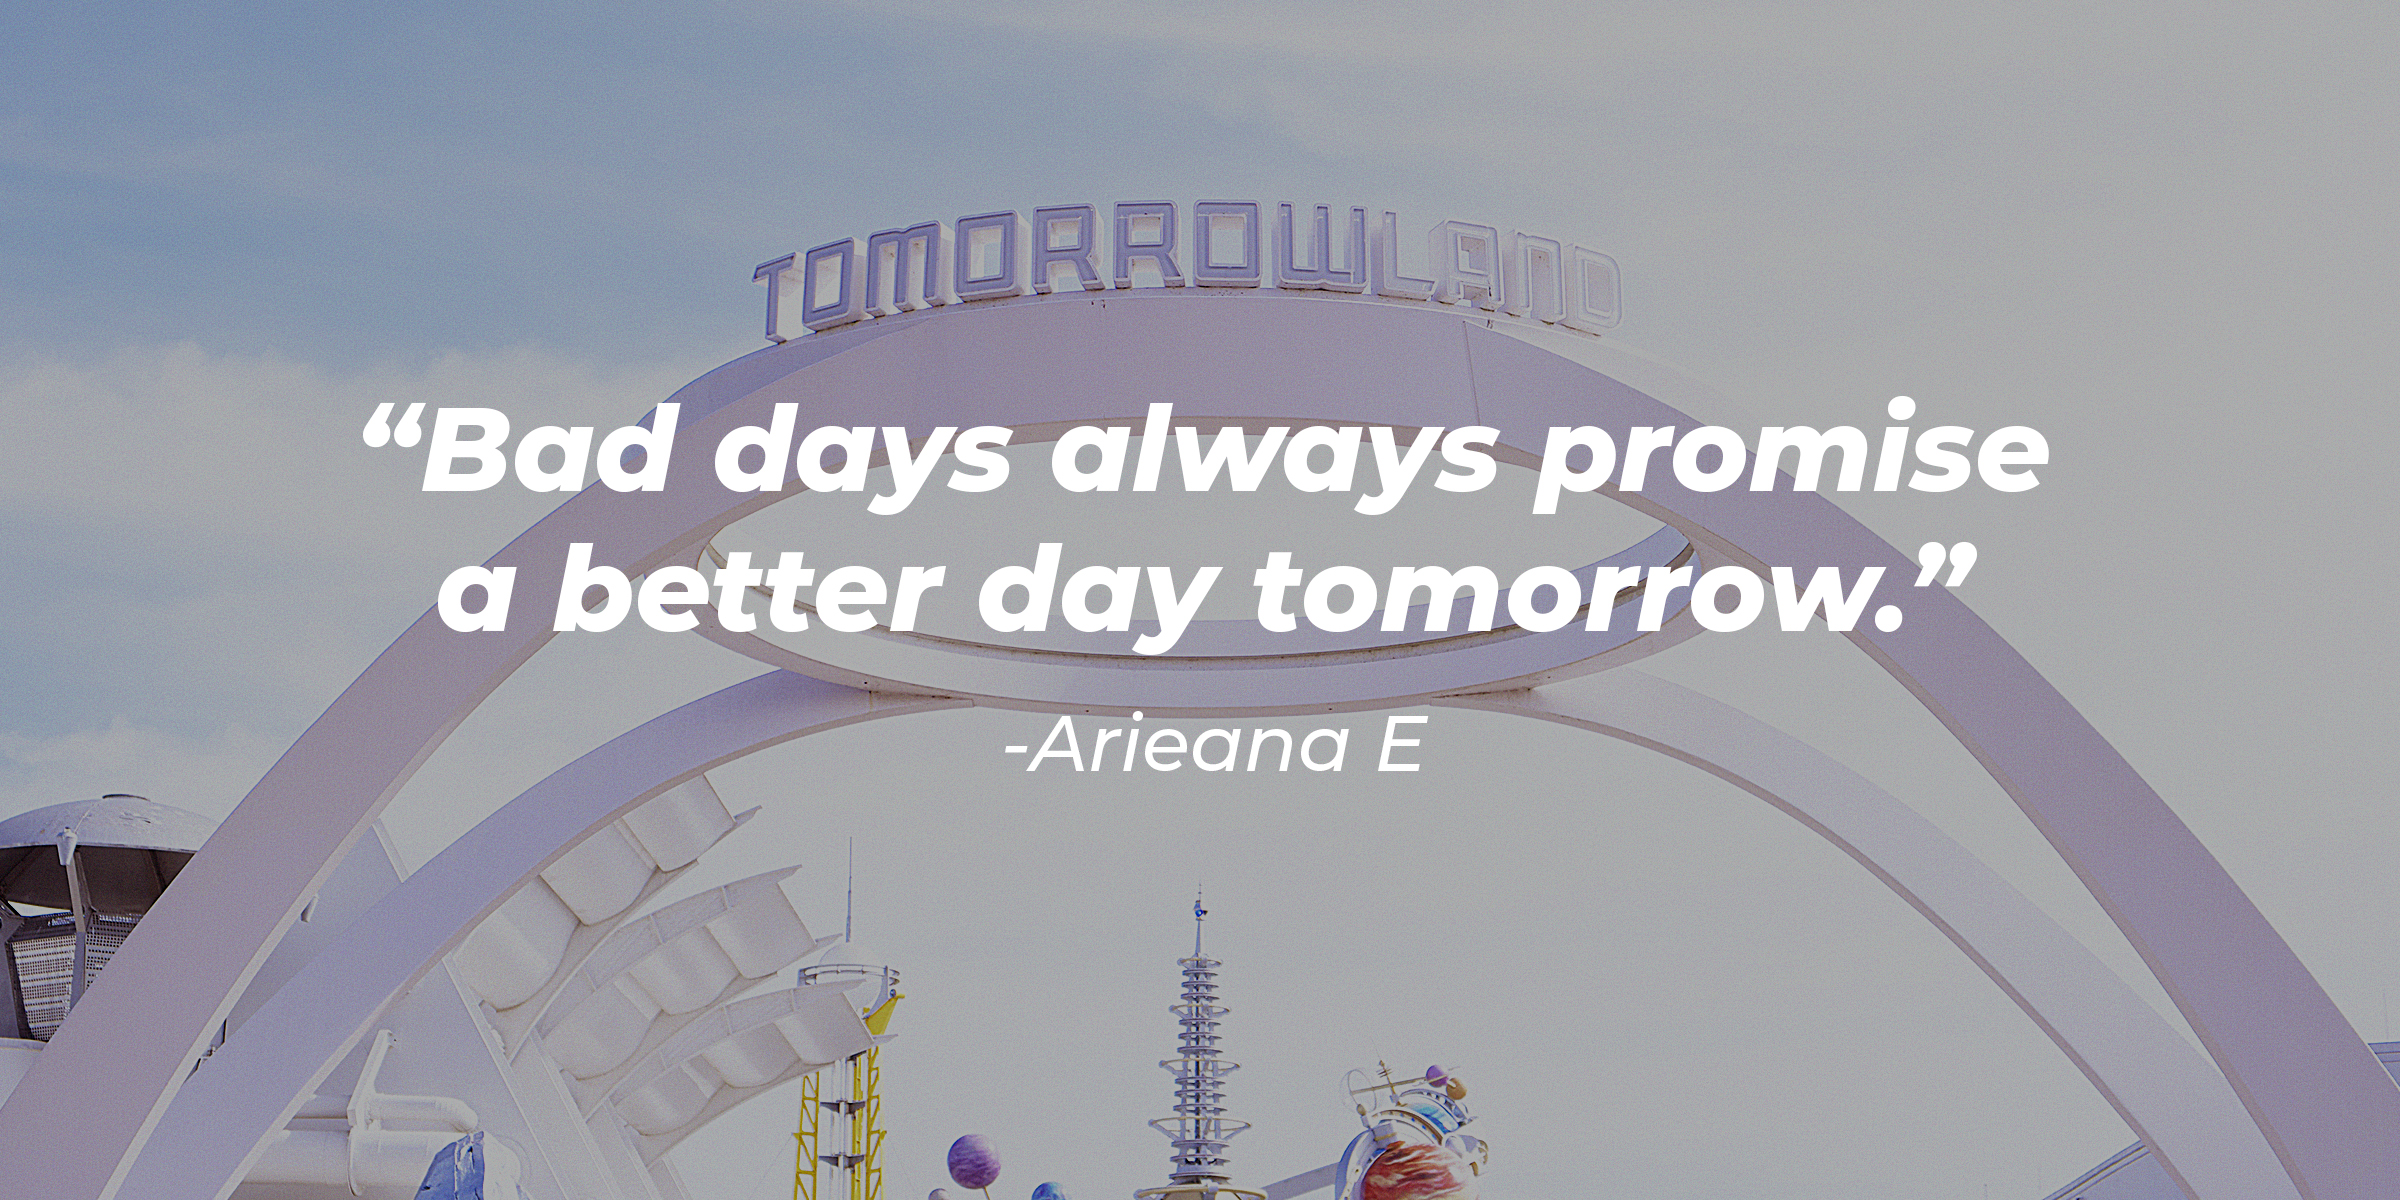 Arieana E's quote: "Bad days always promise a better day tomorrow." | Image: Unsplash.com